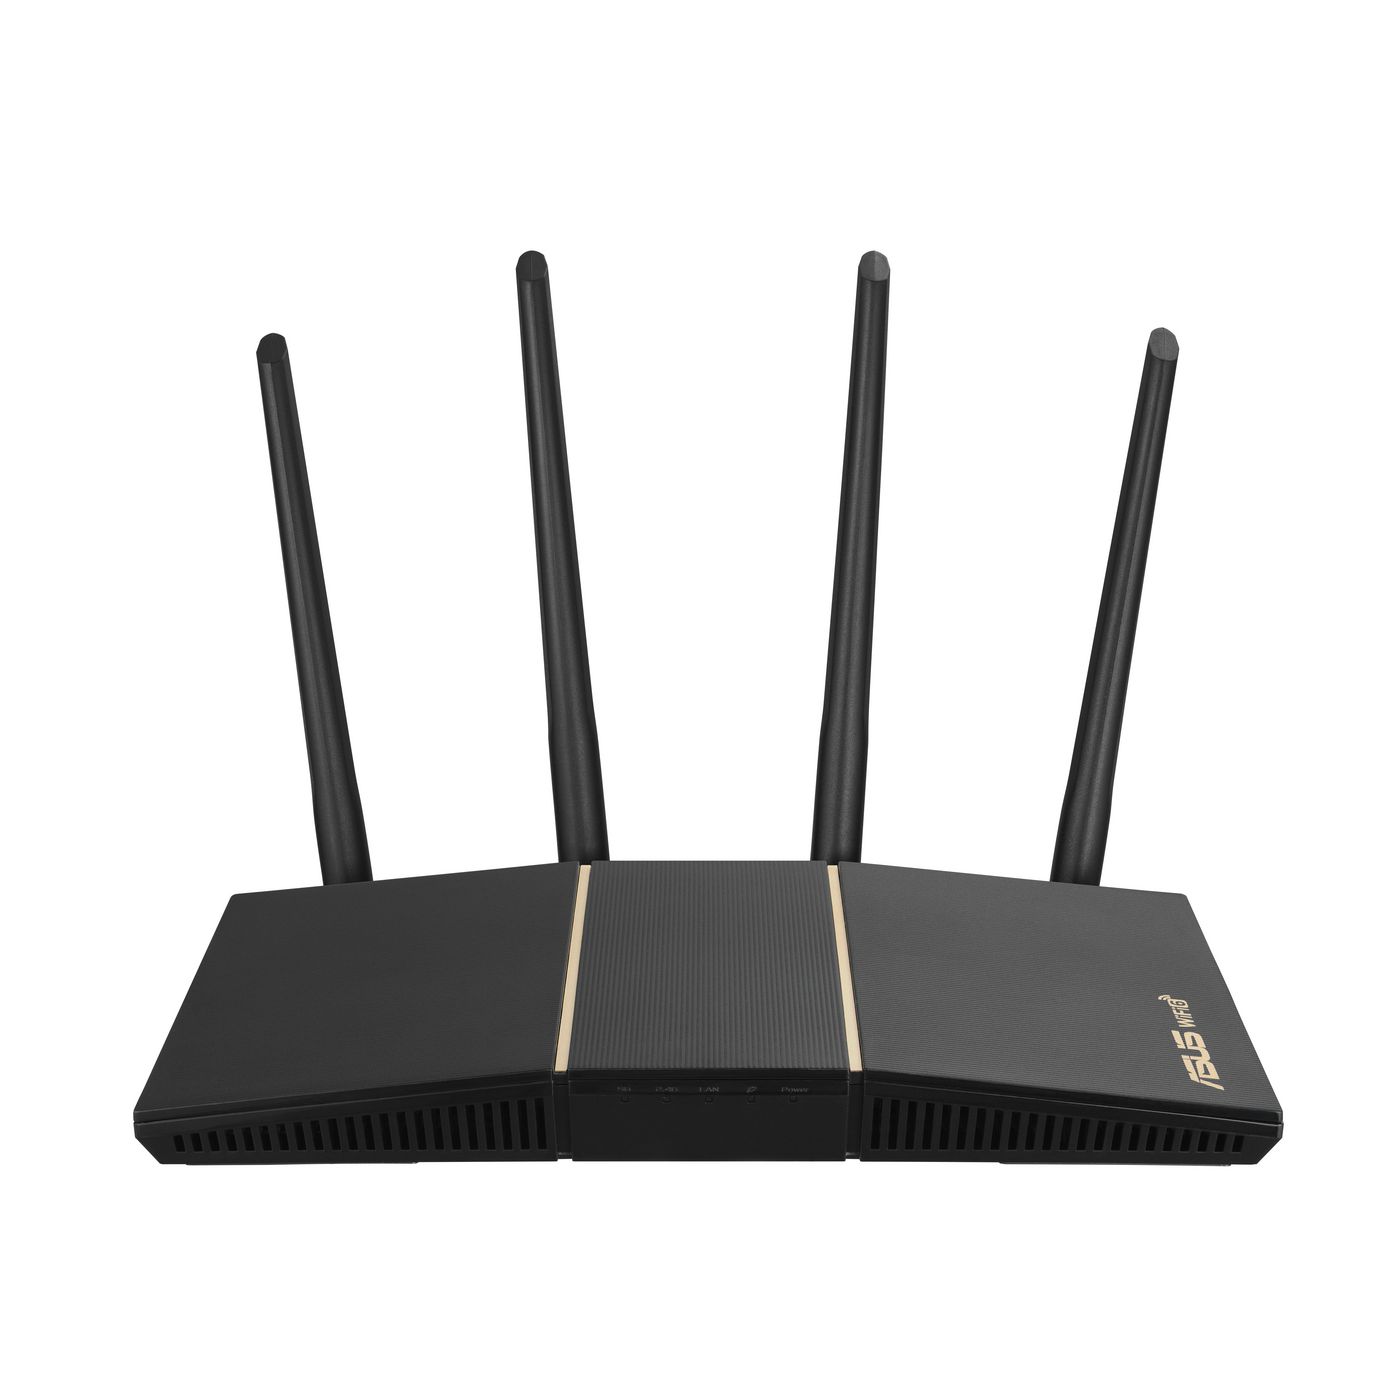 Asus 90IG06Z0-MU2C00 W128825076 Rt-Ax57 Wireless Router 